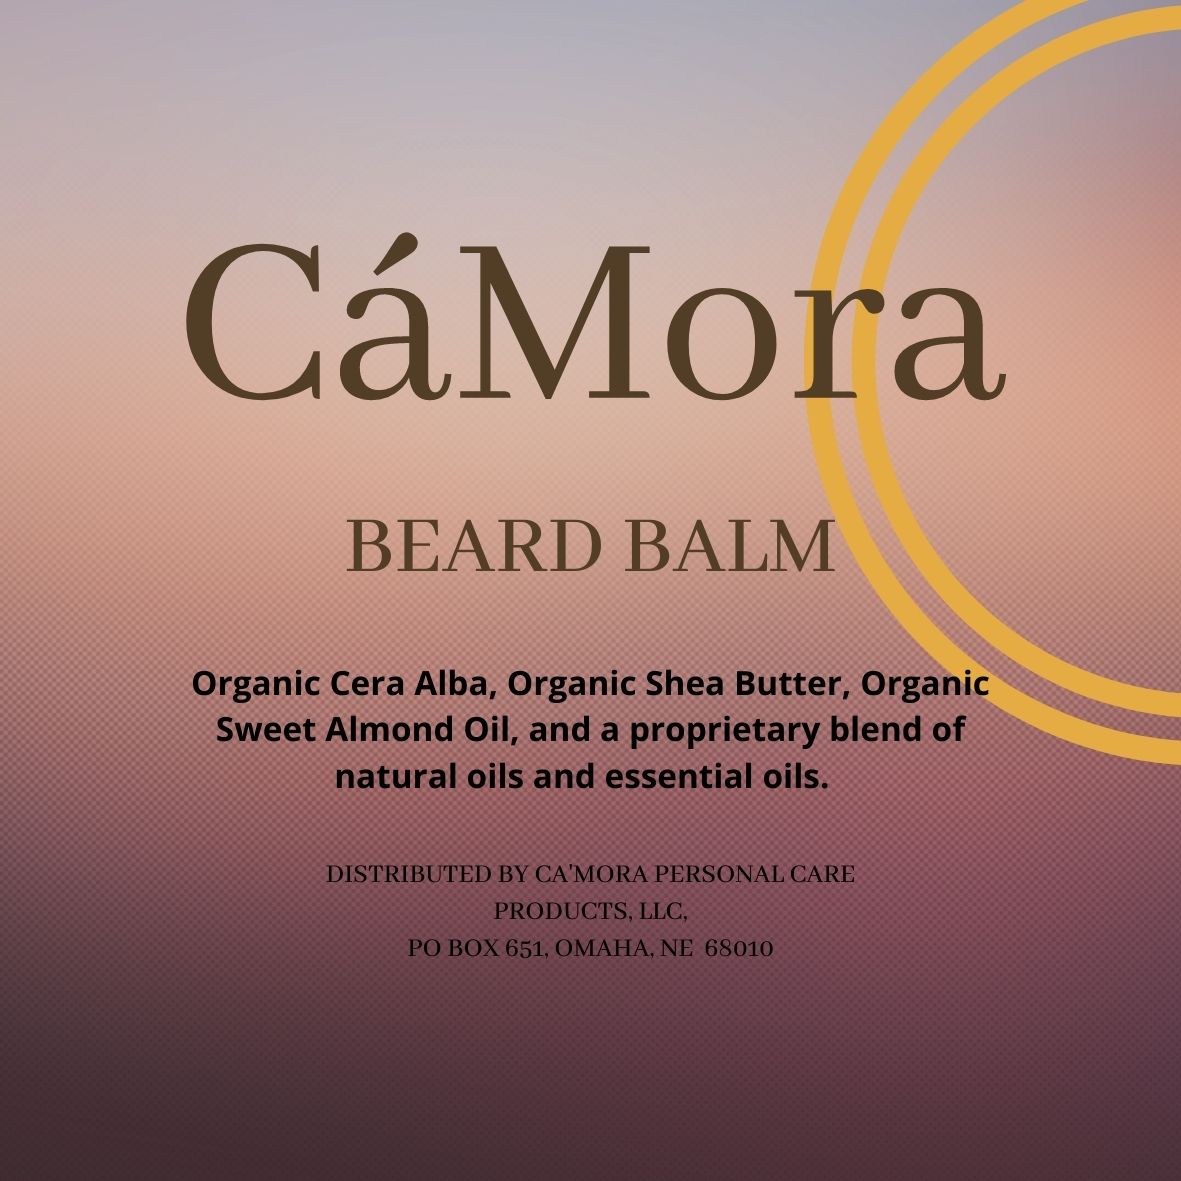 Ca'Mora organic beard balm product label with ingredients.